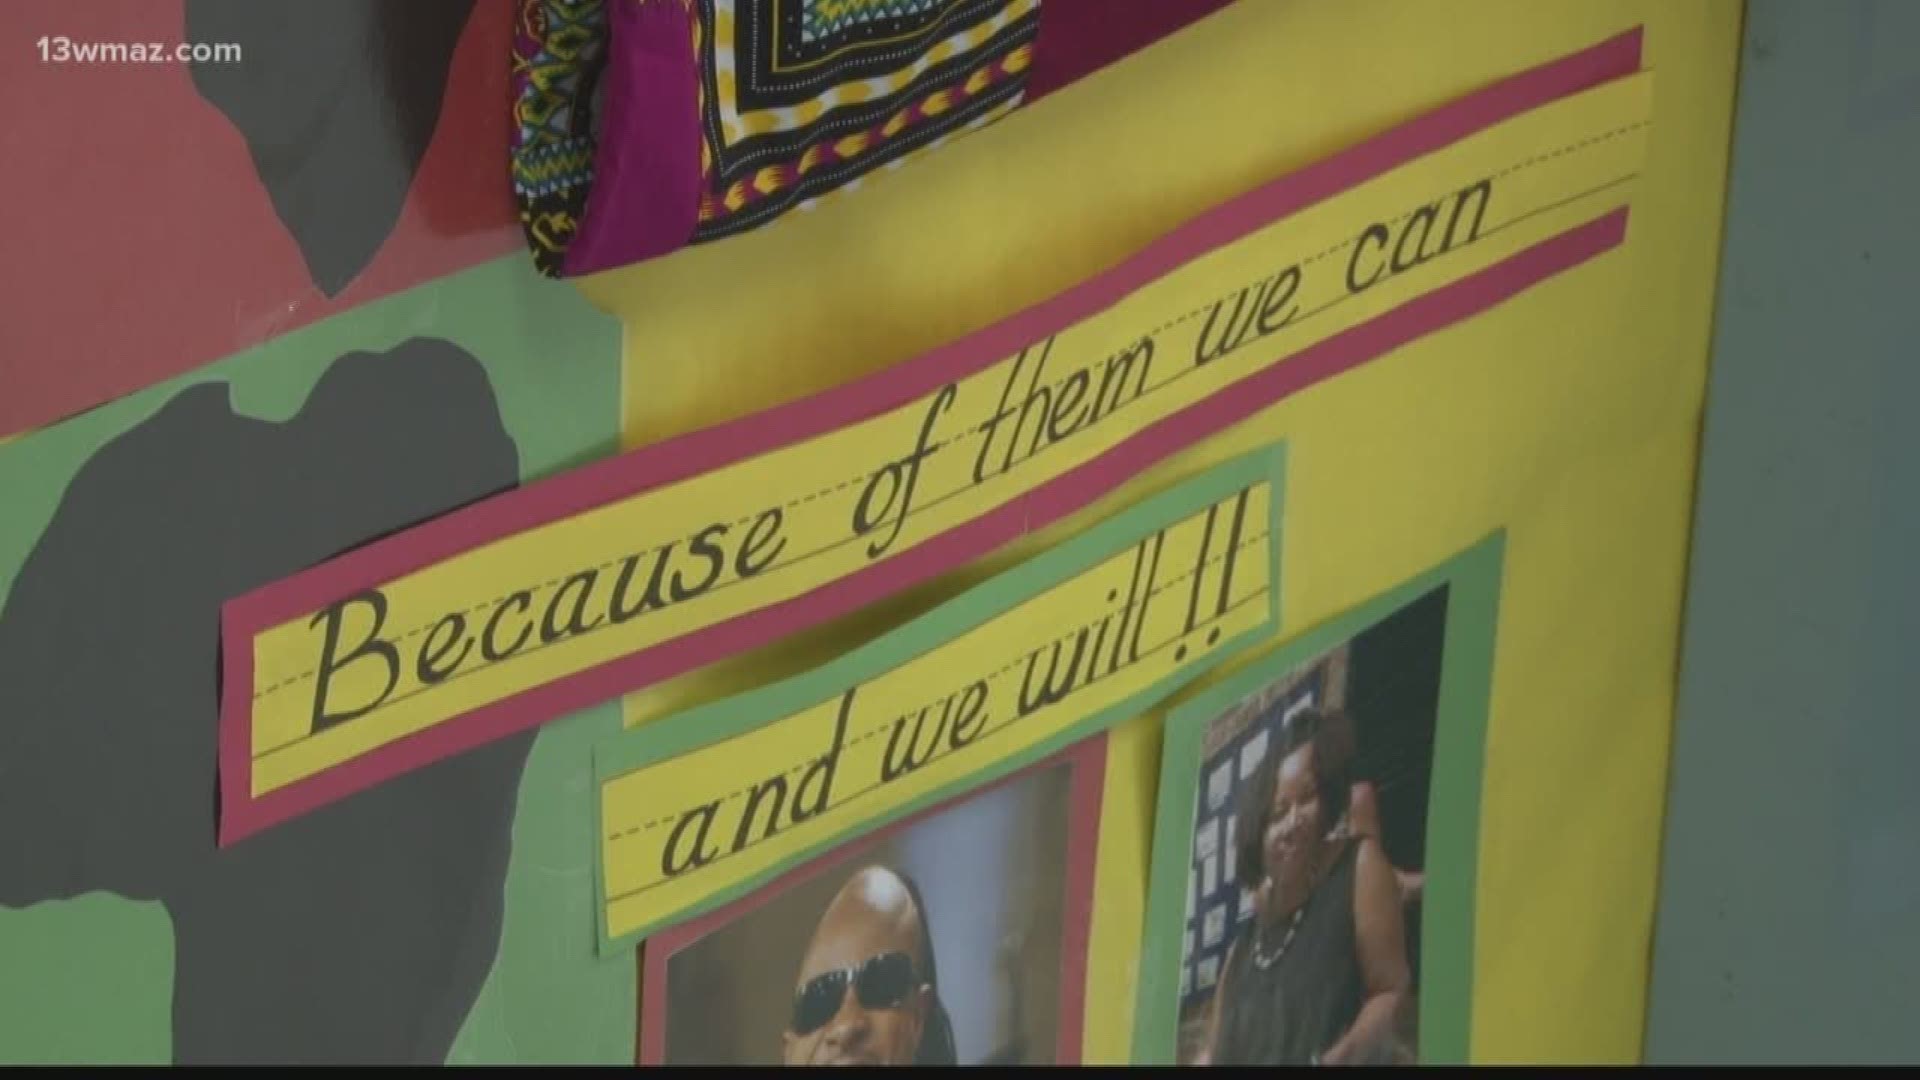 Class door decoration honors Black History Month